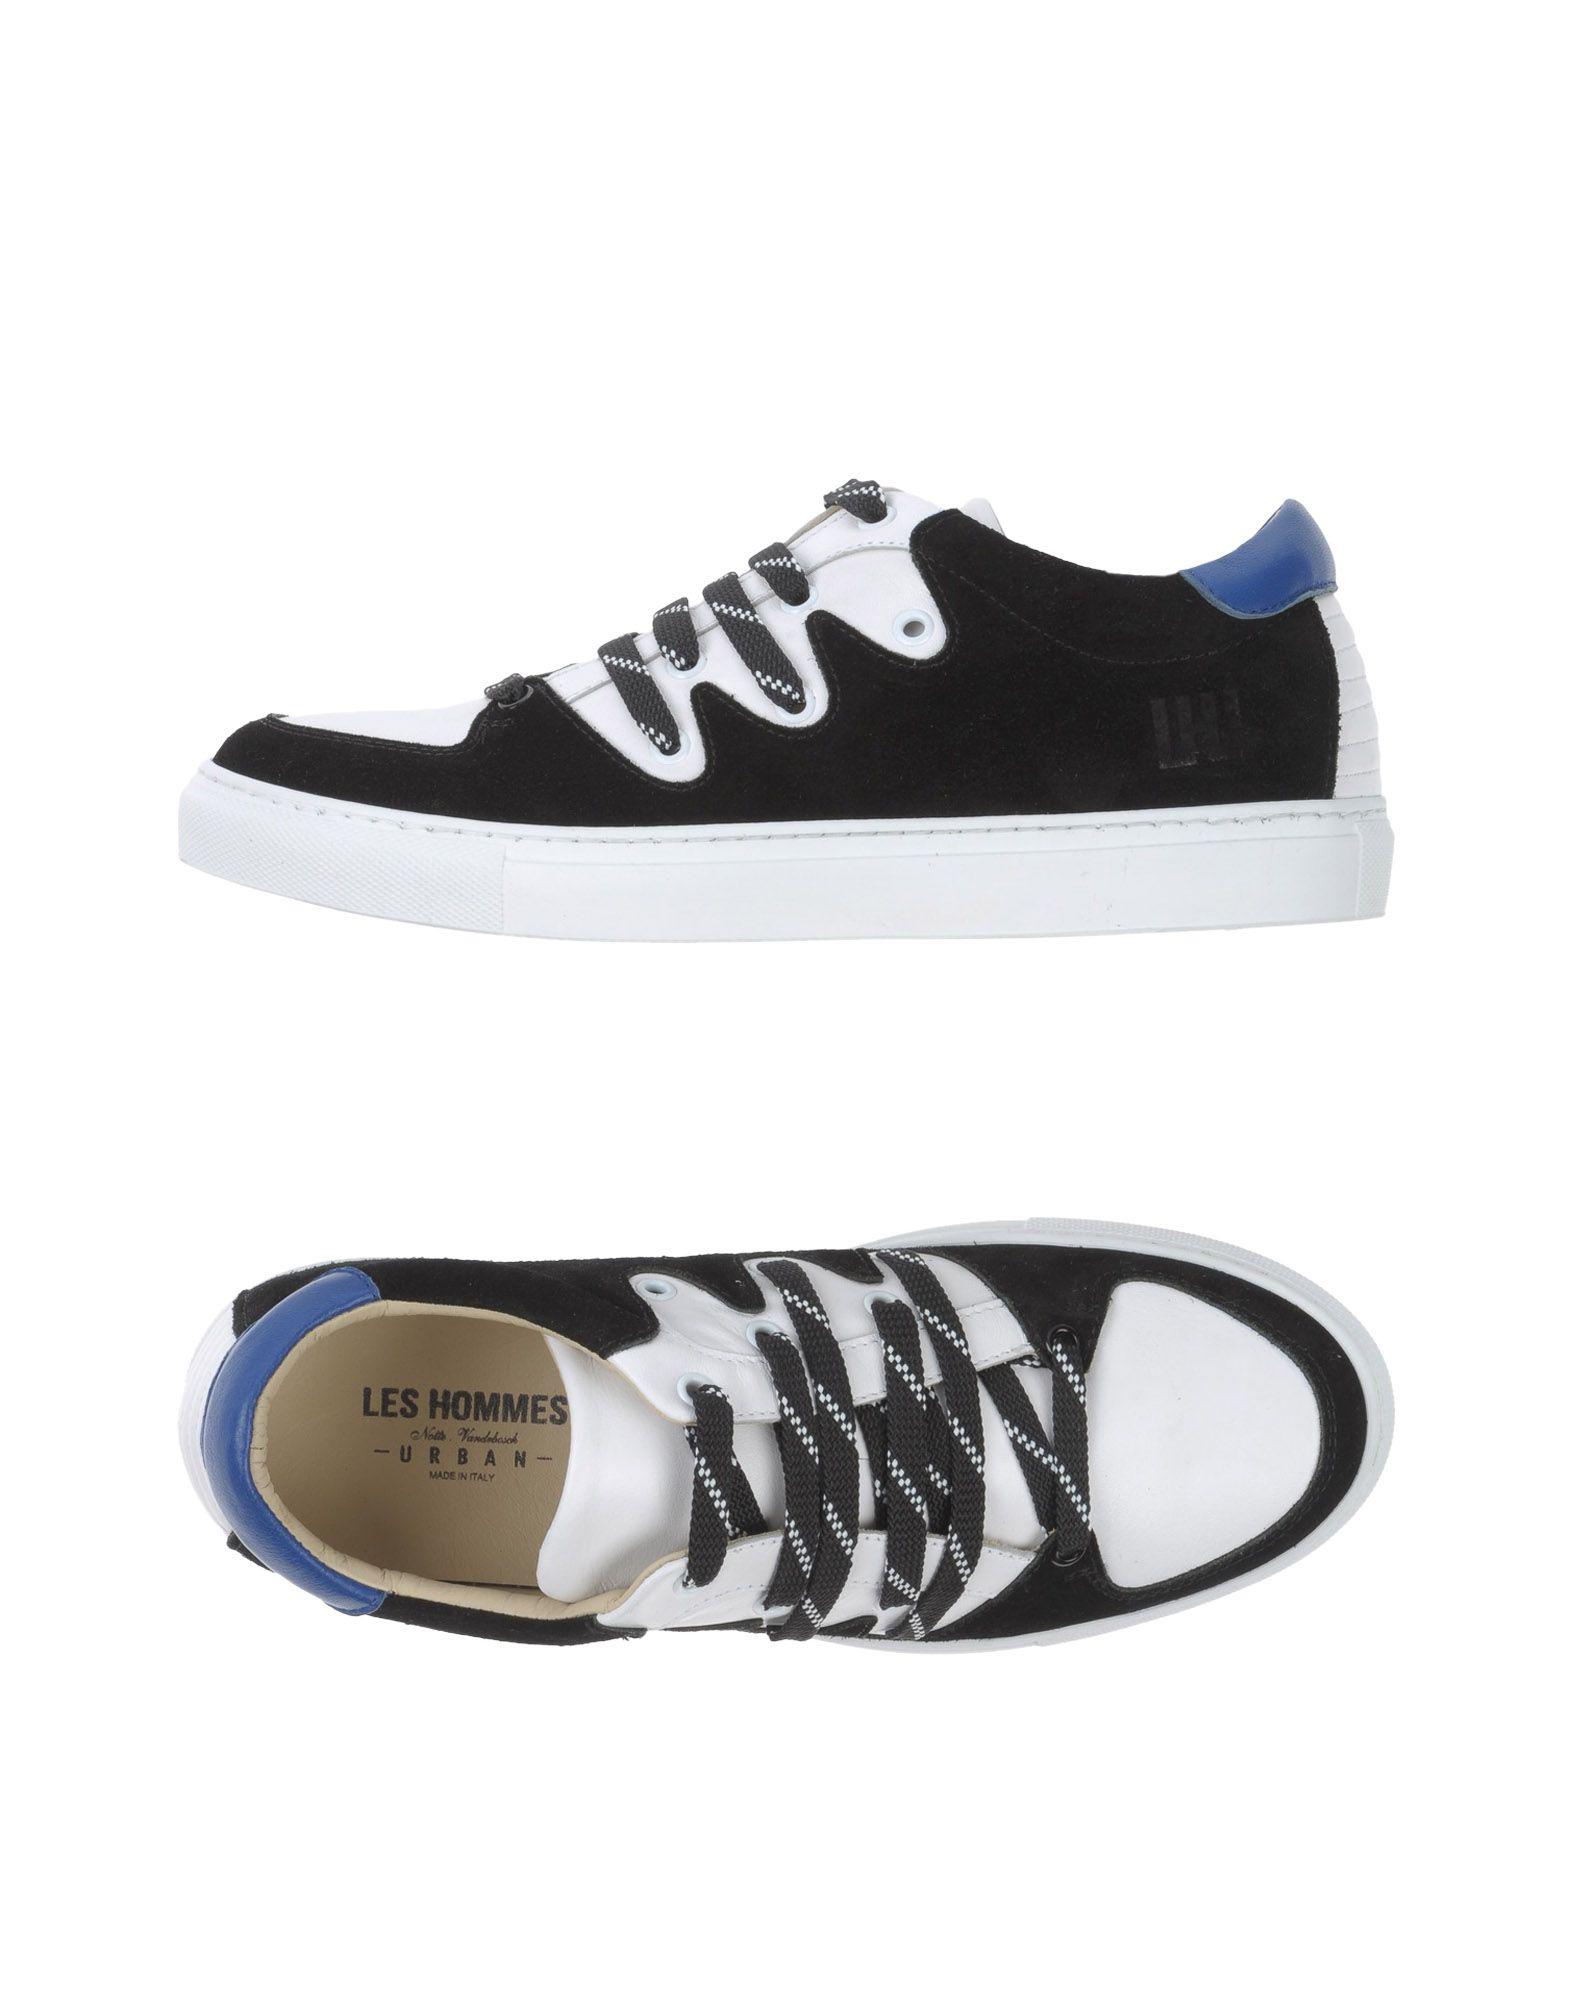 Les Hommes Leather Low-tops & Sneakers in Black for Men - Lyst